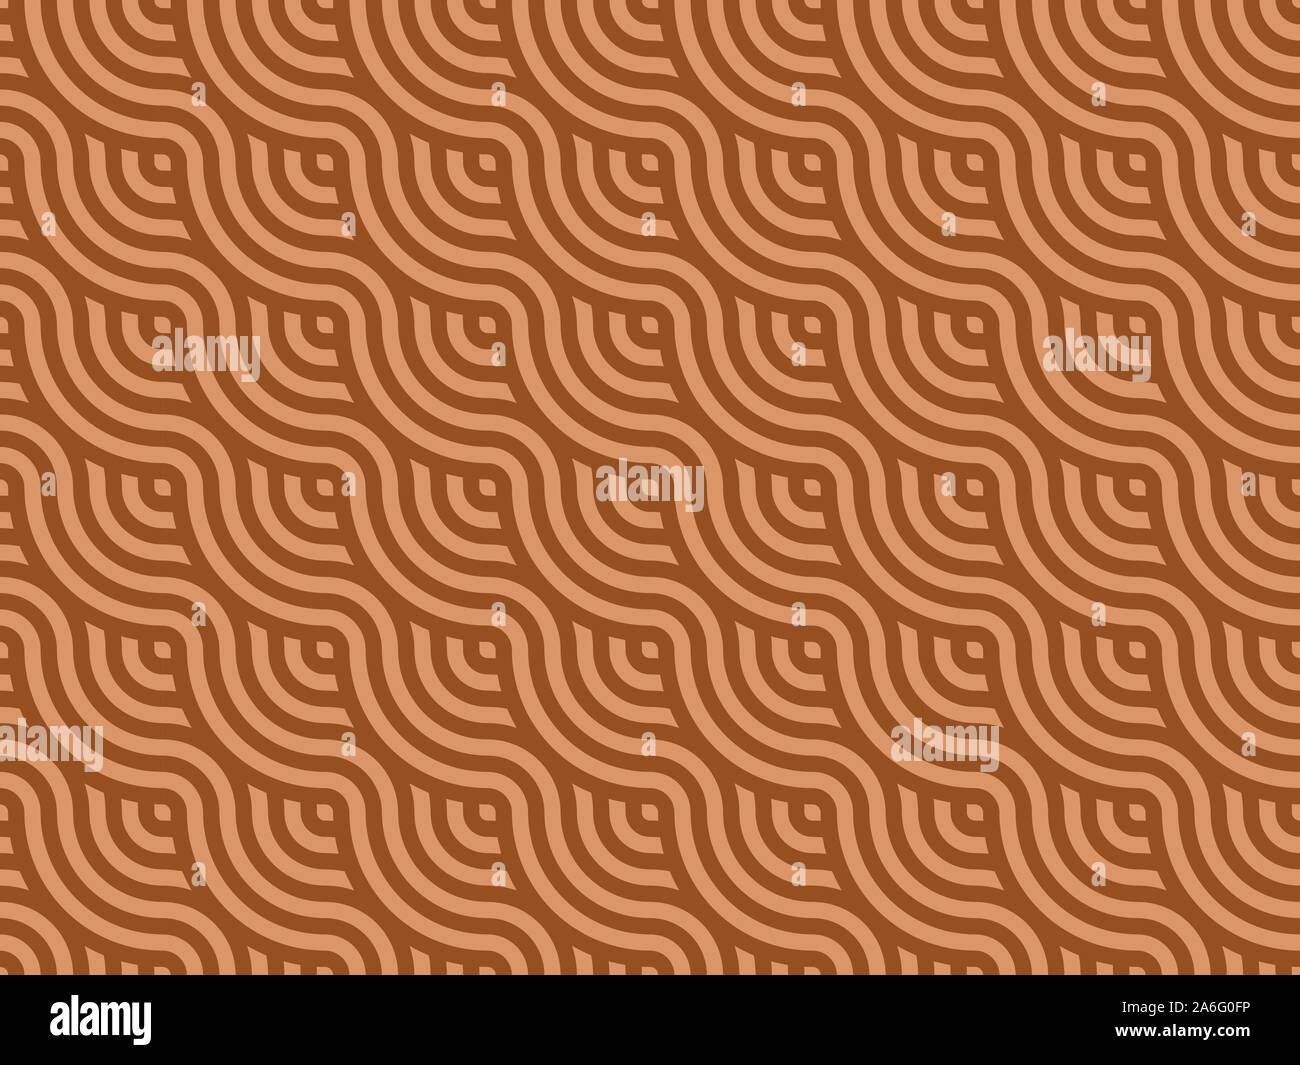 Brown and beige stripes weaving background. Overlapping repeating circles make curly texture. Japanese style wavy lines seamless pattern. Vector Stock Vector